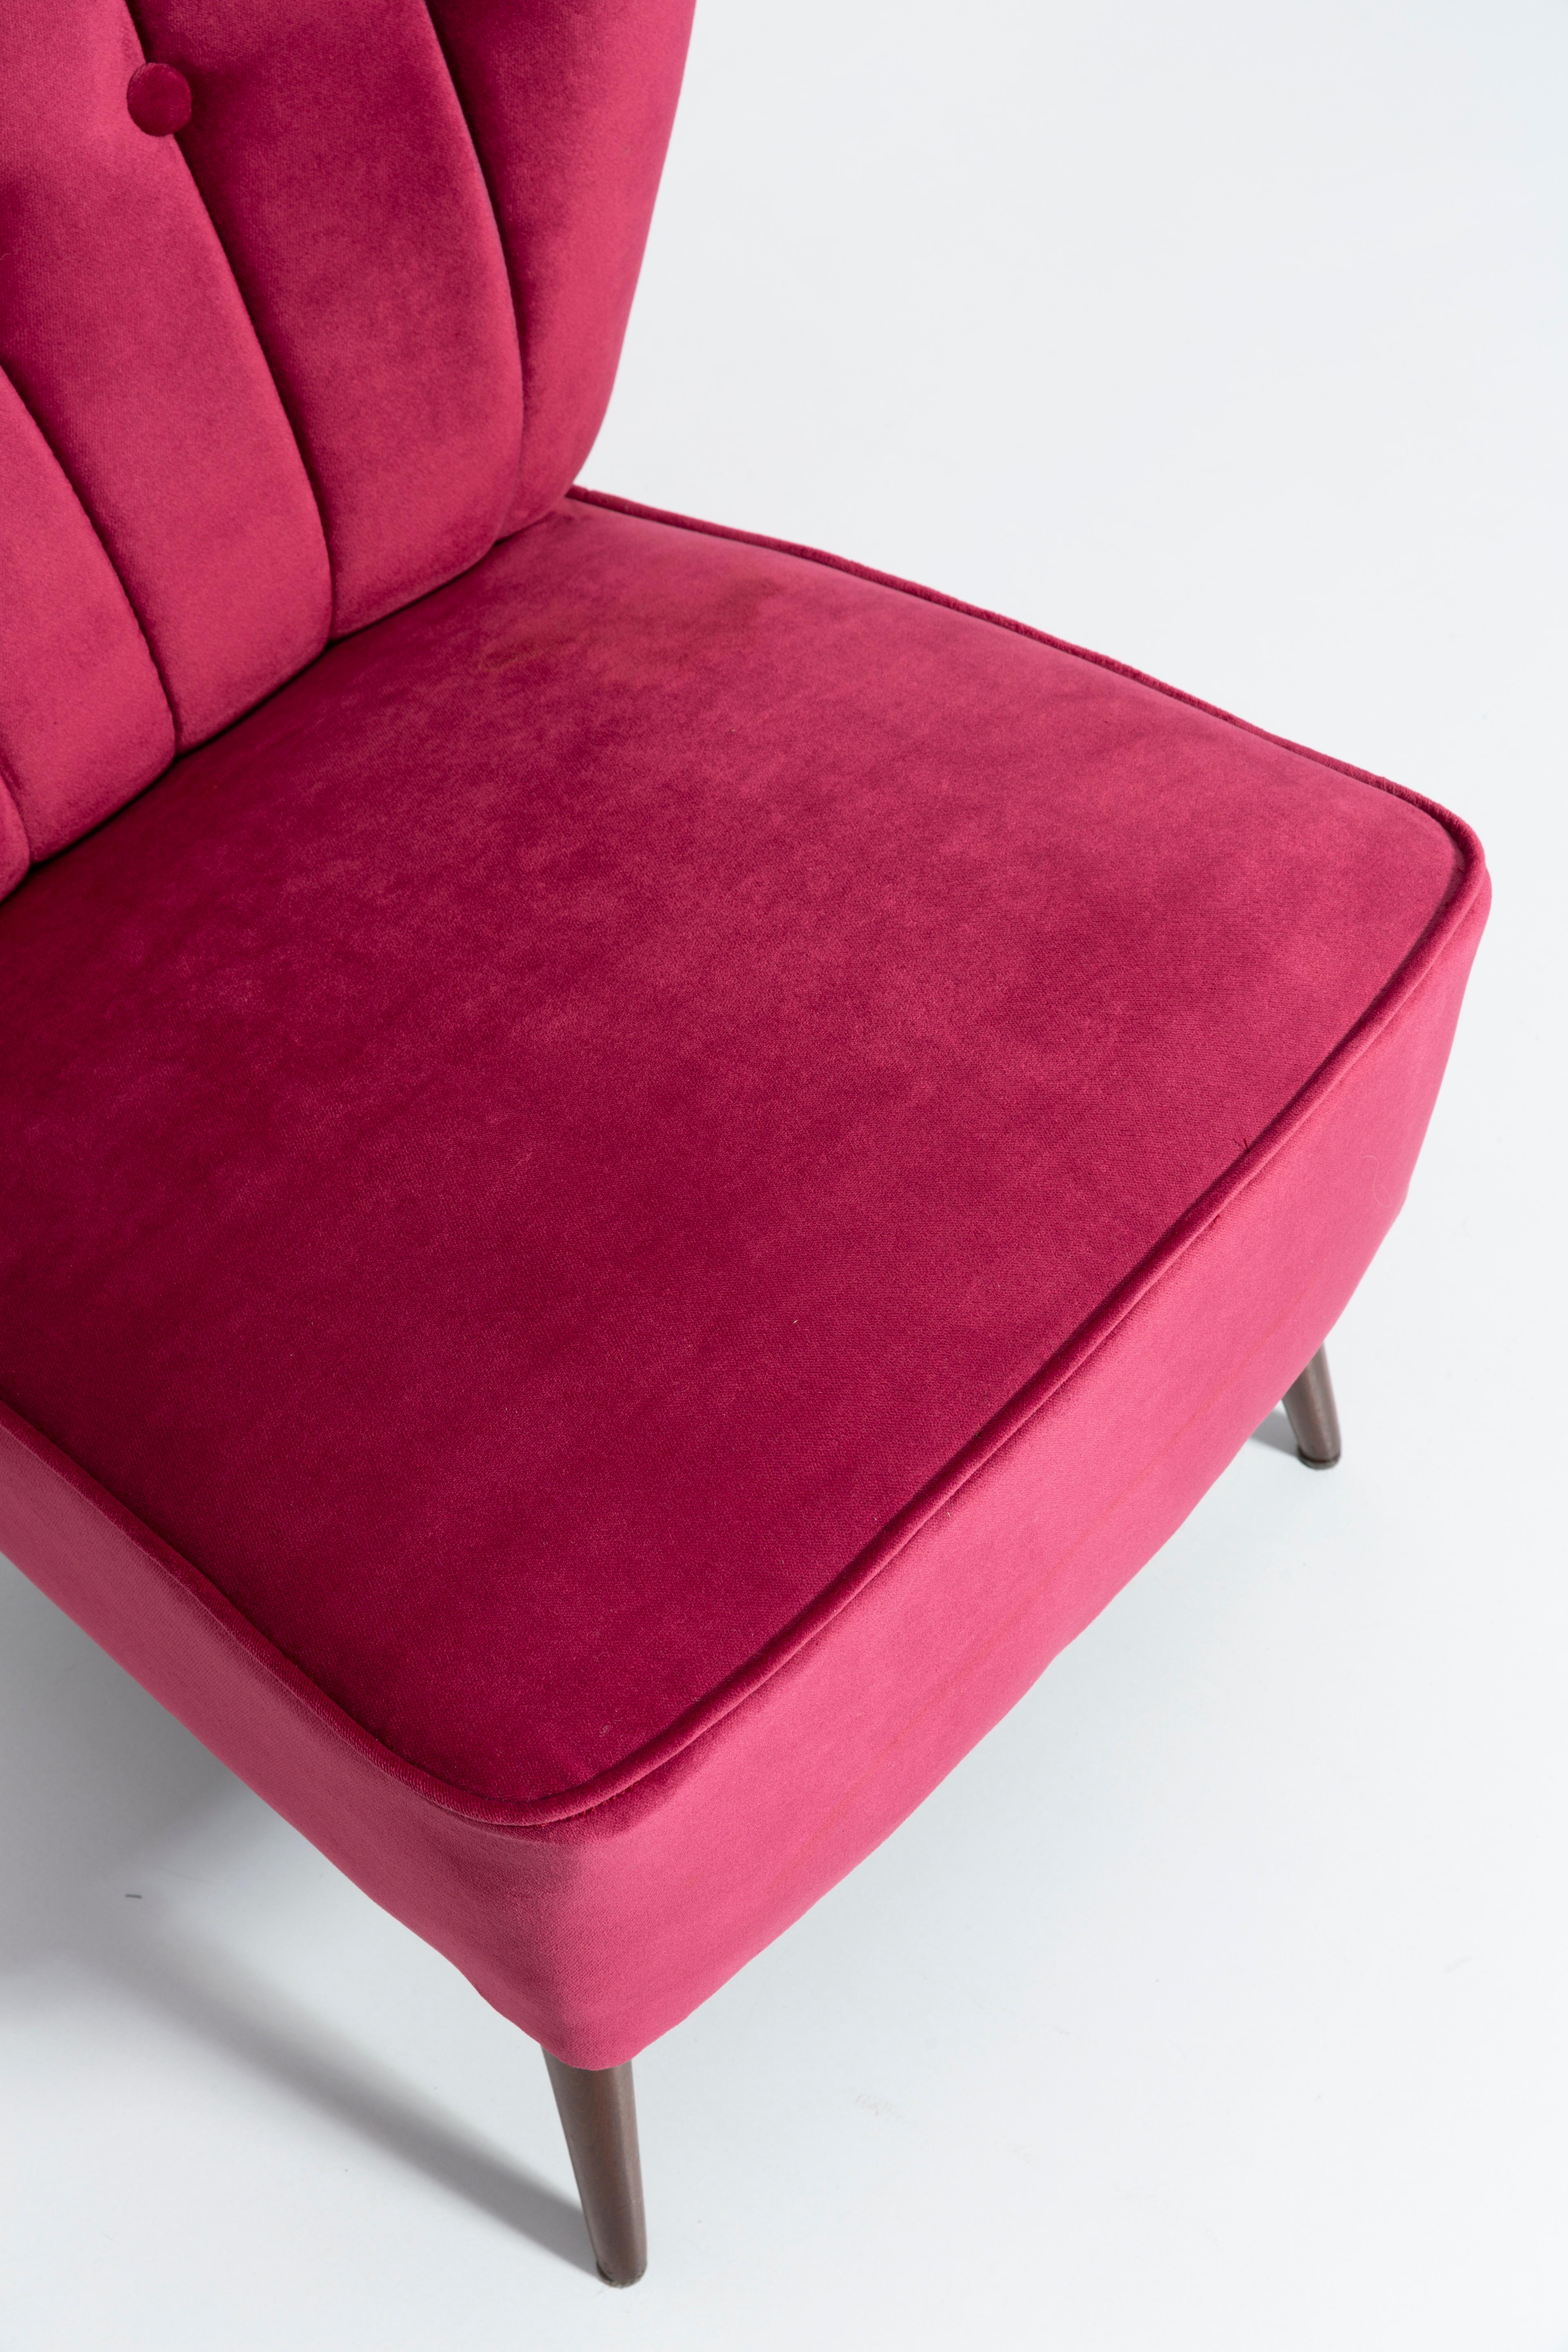 Four Midcentury Magenta Pink Velvet Club Armchairs, Europe, 1960s For Sale 3